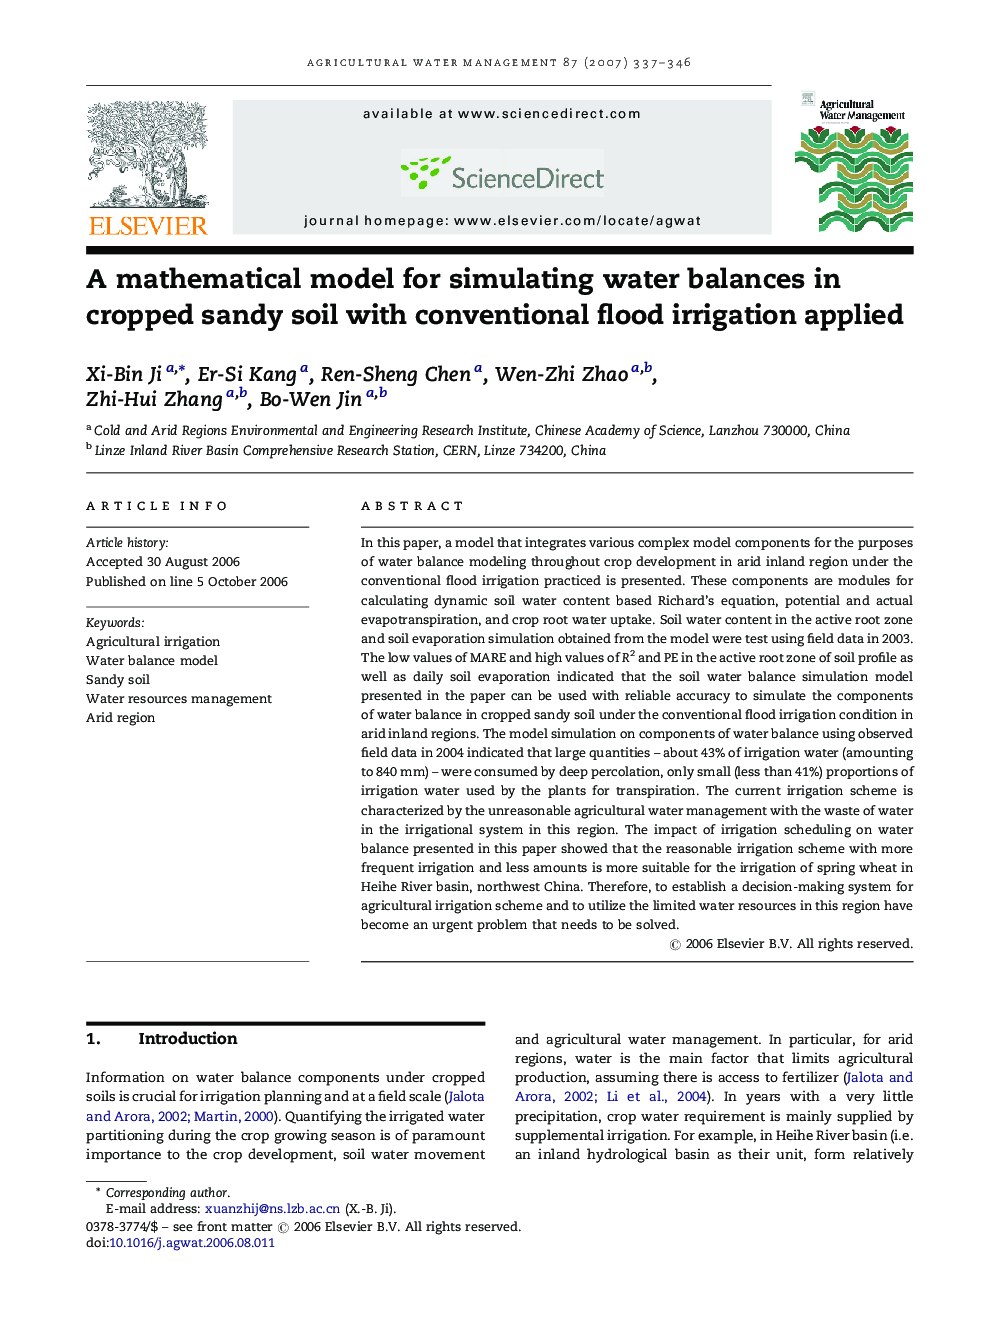 A mathematical model for simulating water balances in cropped sandy soil with conventional flood irrigation applied